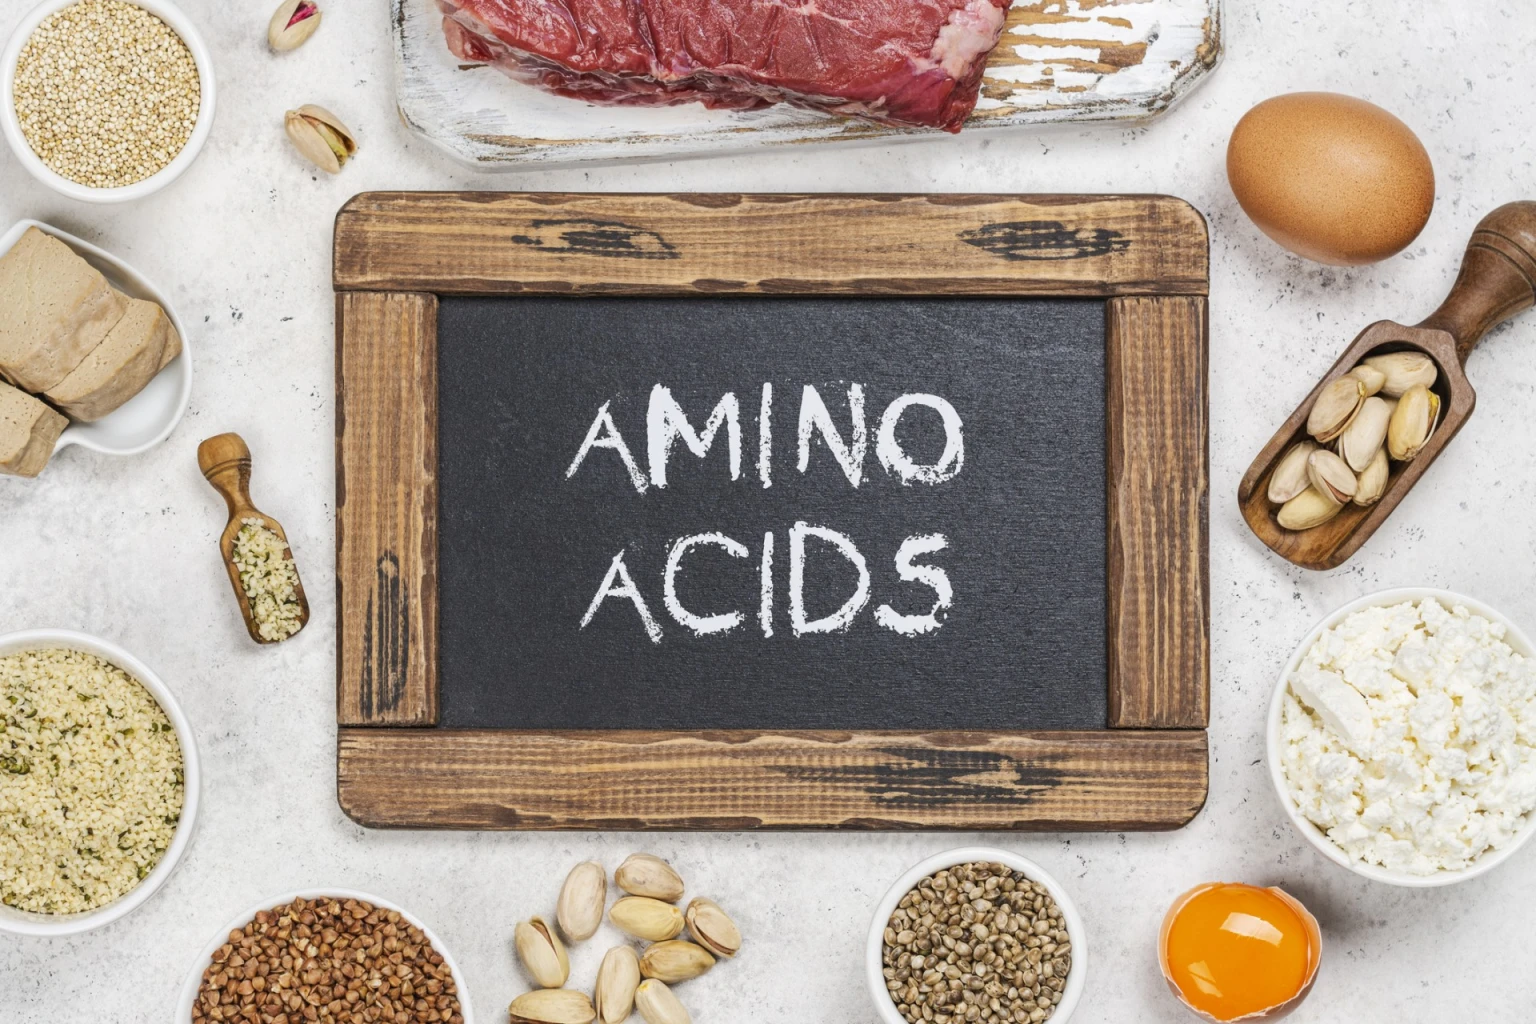 What Are Amino Acids And What Do They Do? feature image